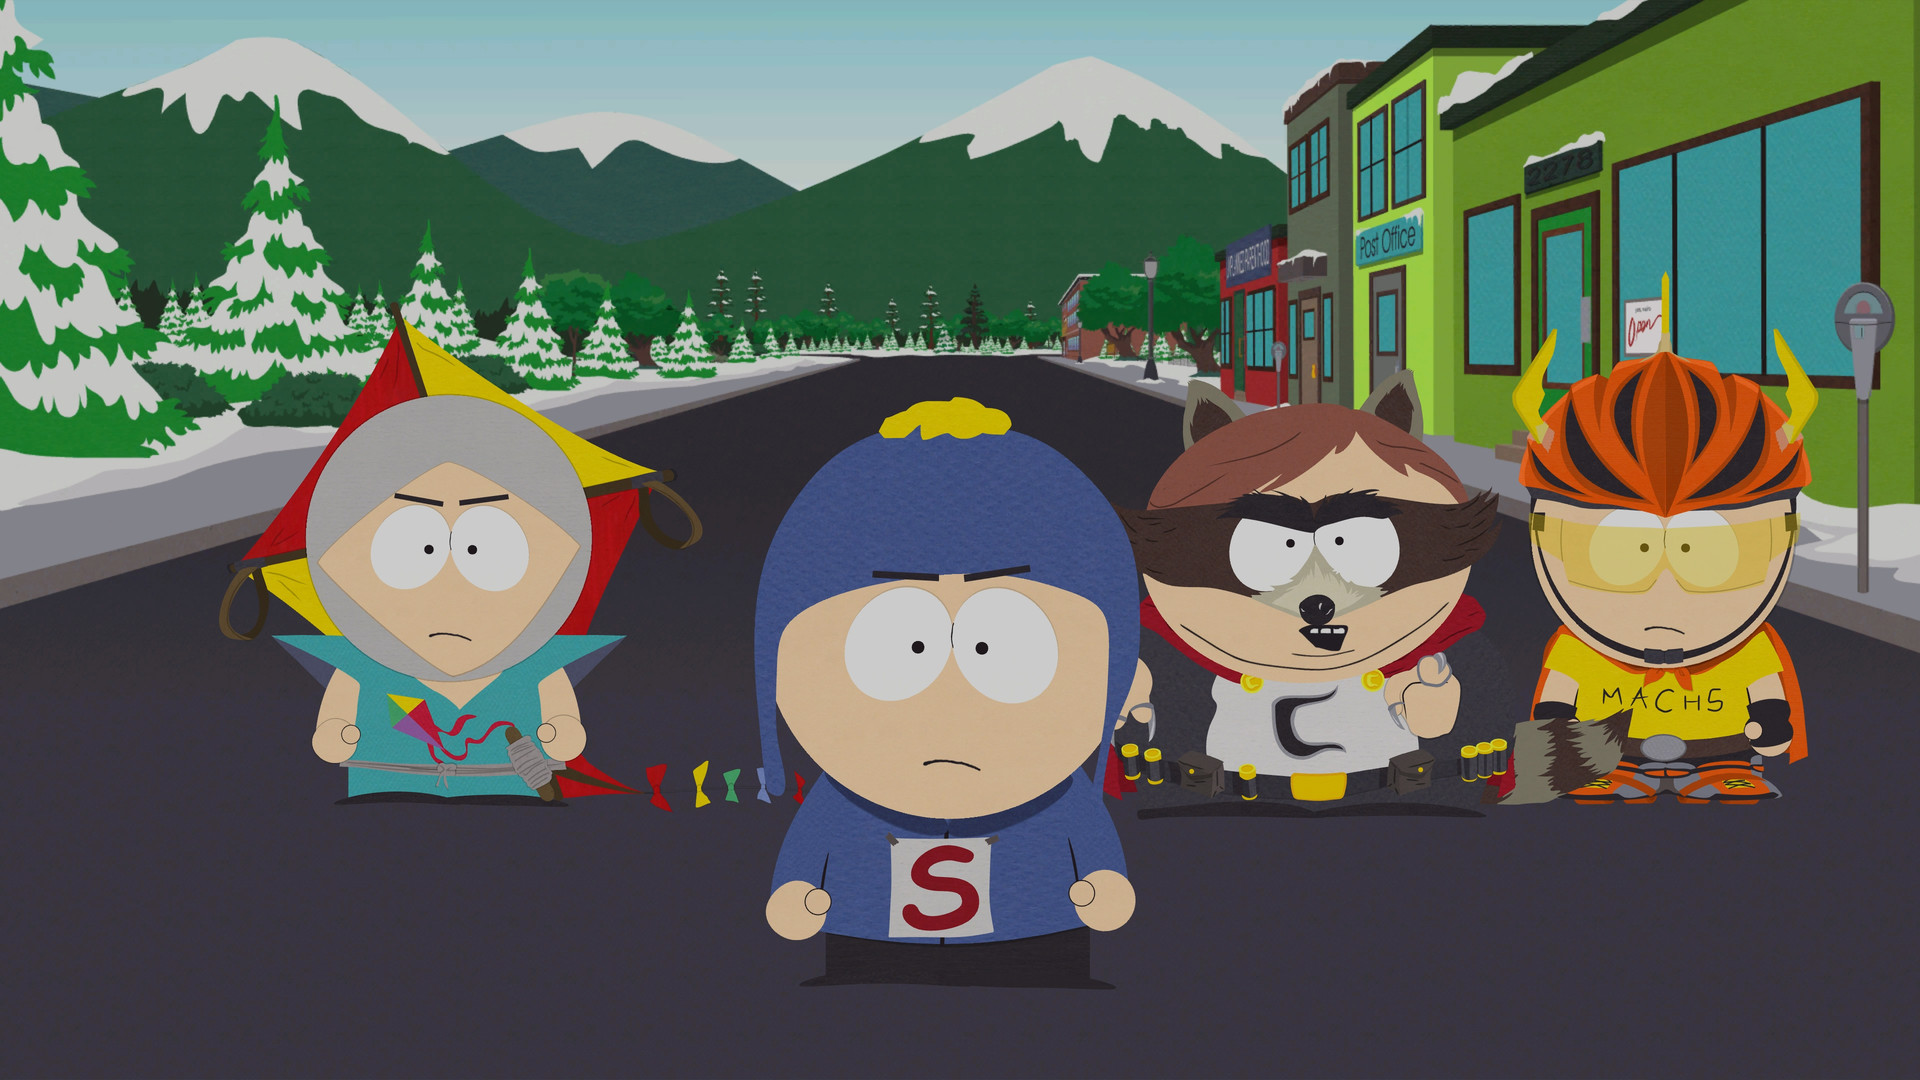 The South Park characters in a town